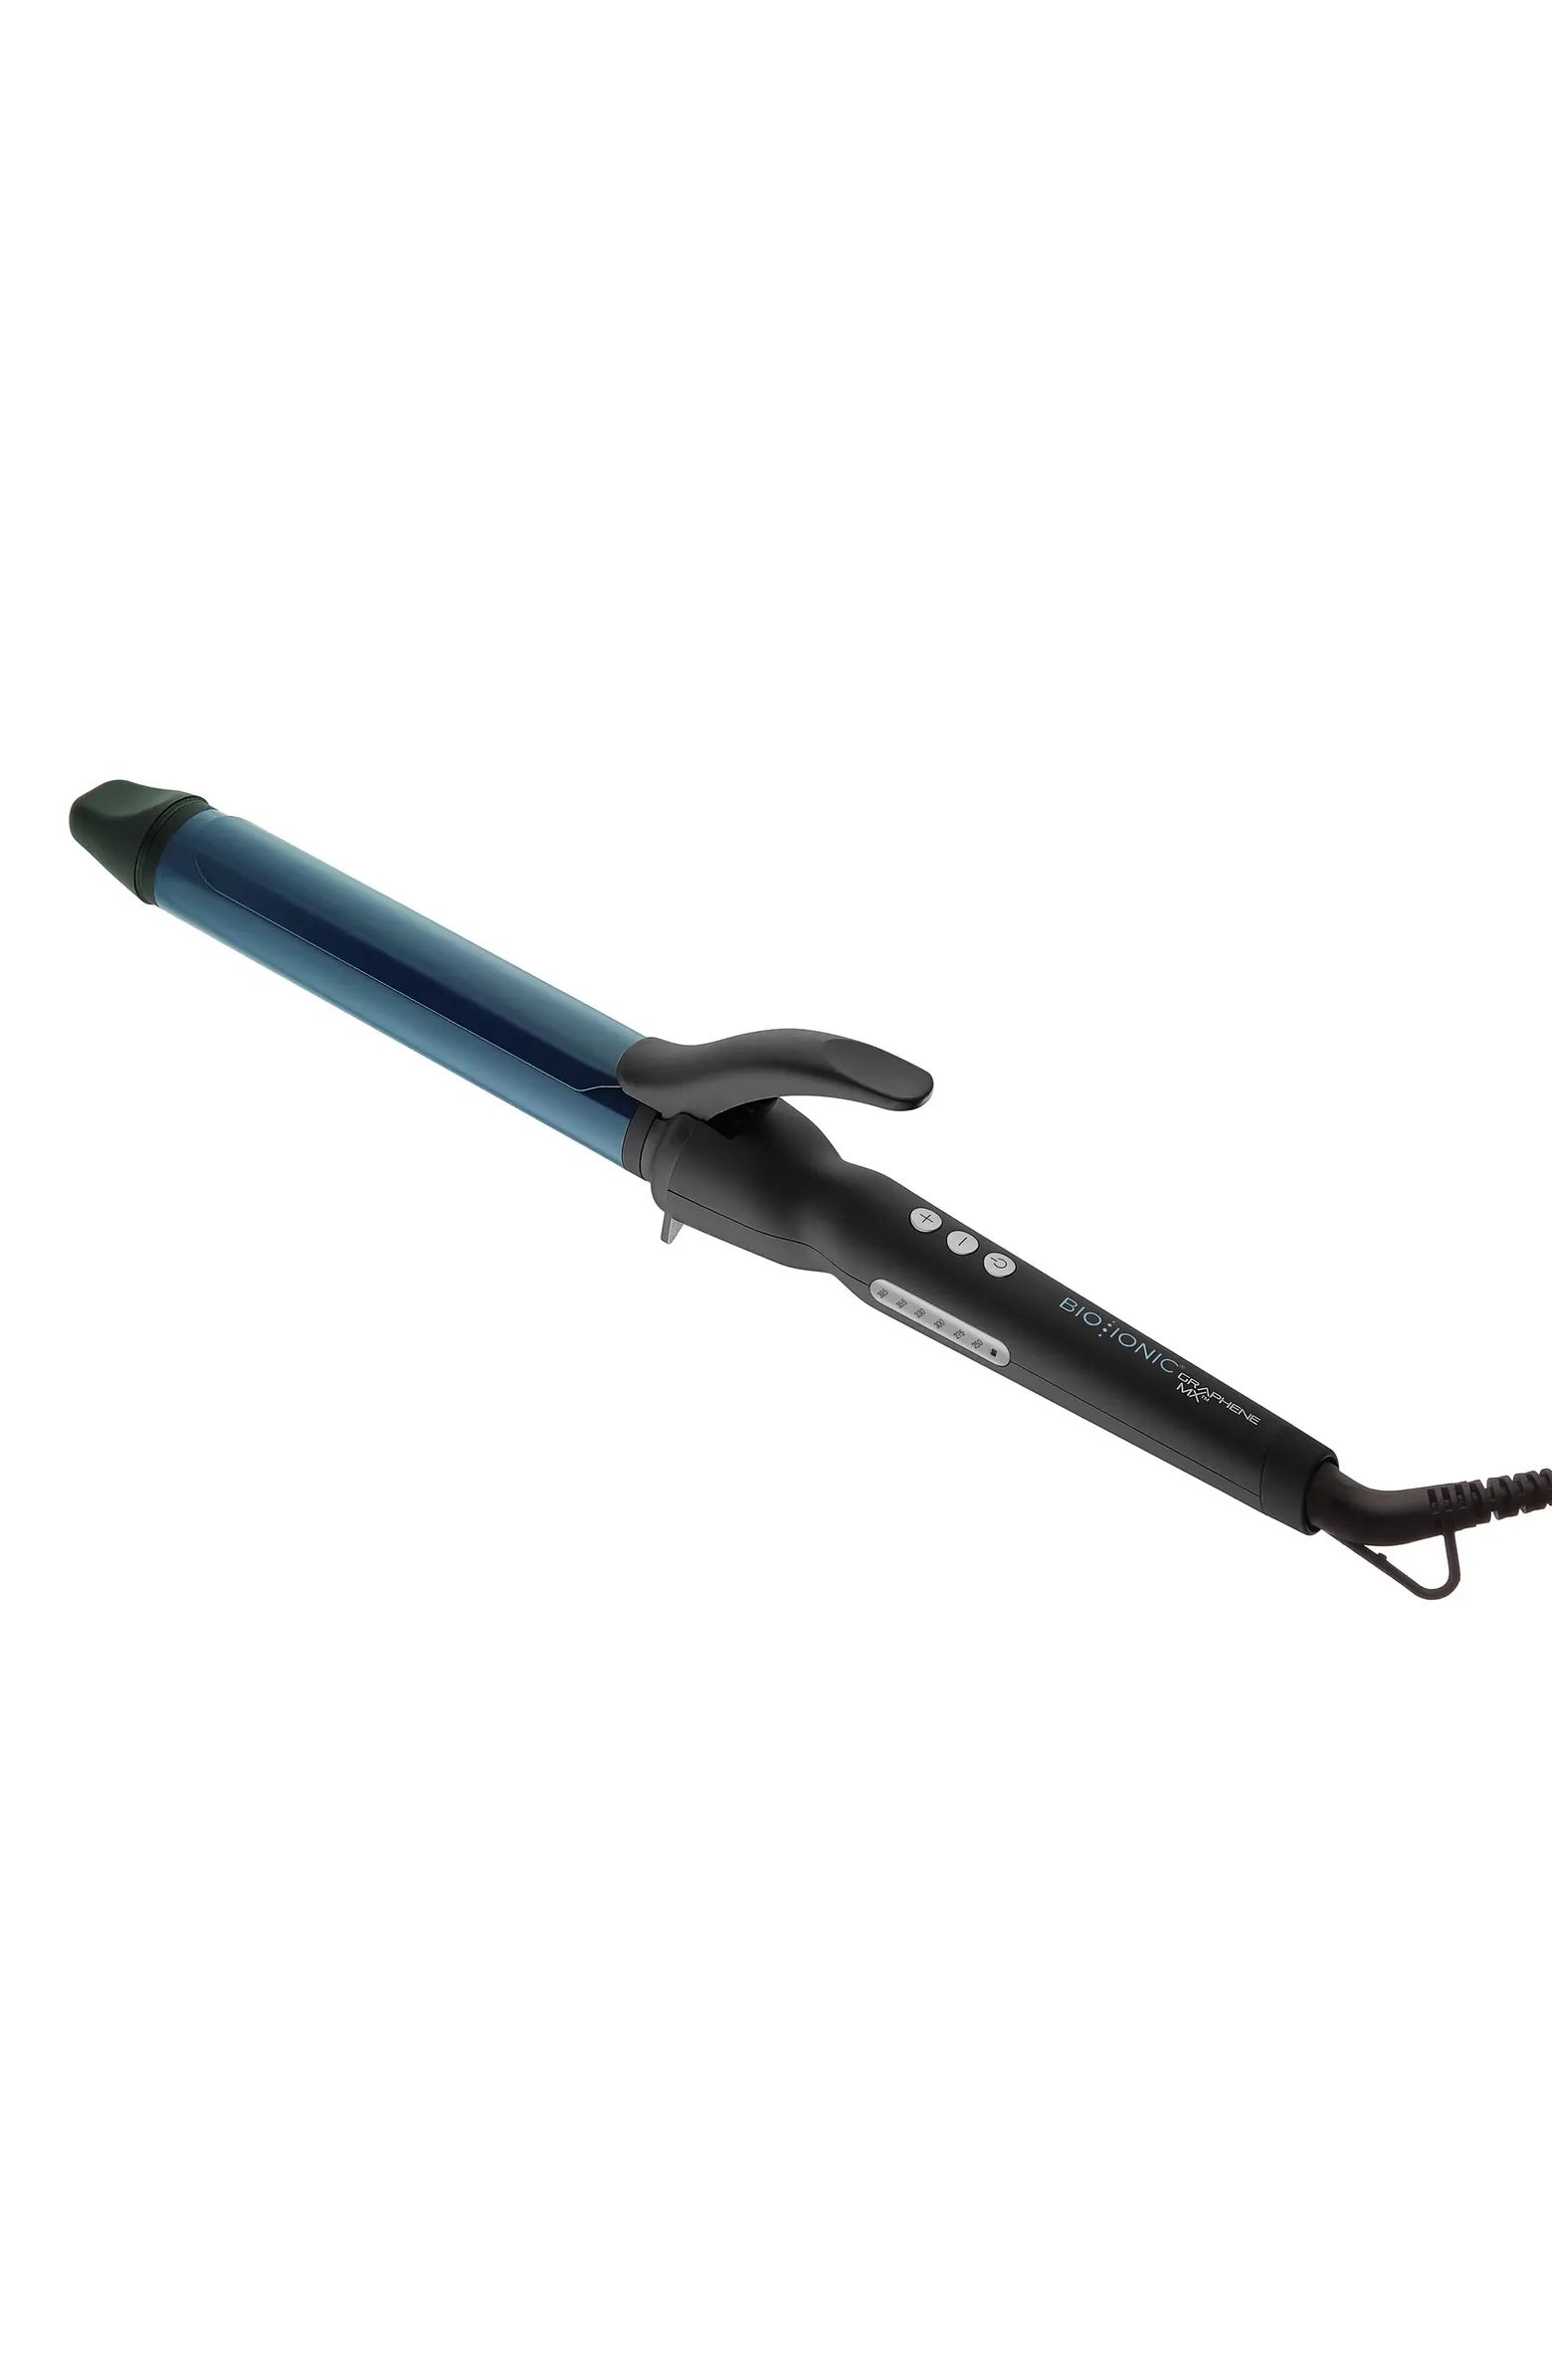 Bio Iconic GrapheneMX 1.25-inch Extended Barrel Curling Iron | Nordstrom